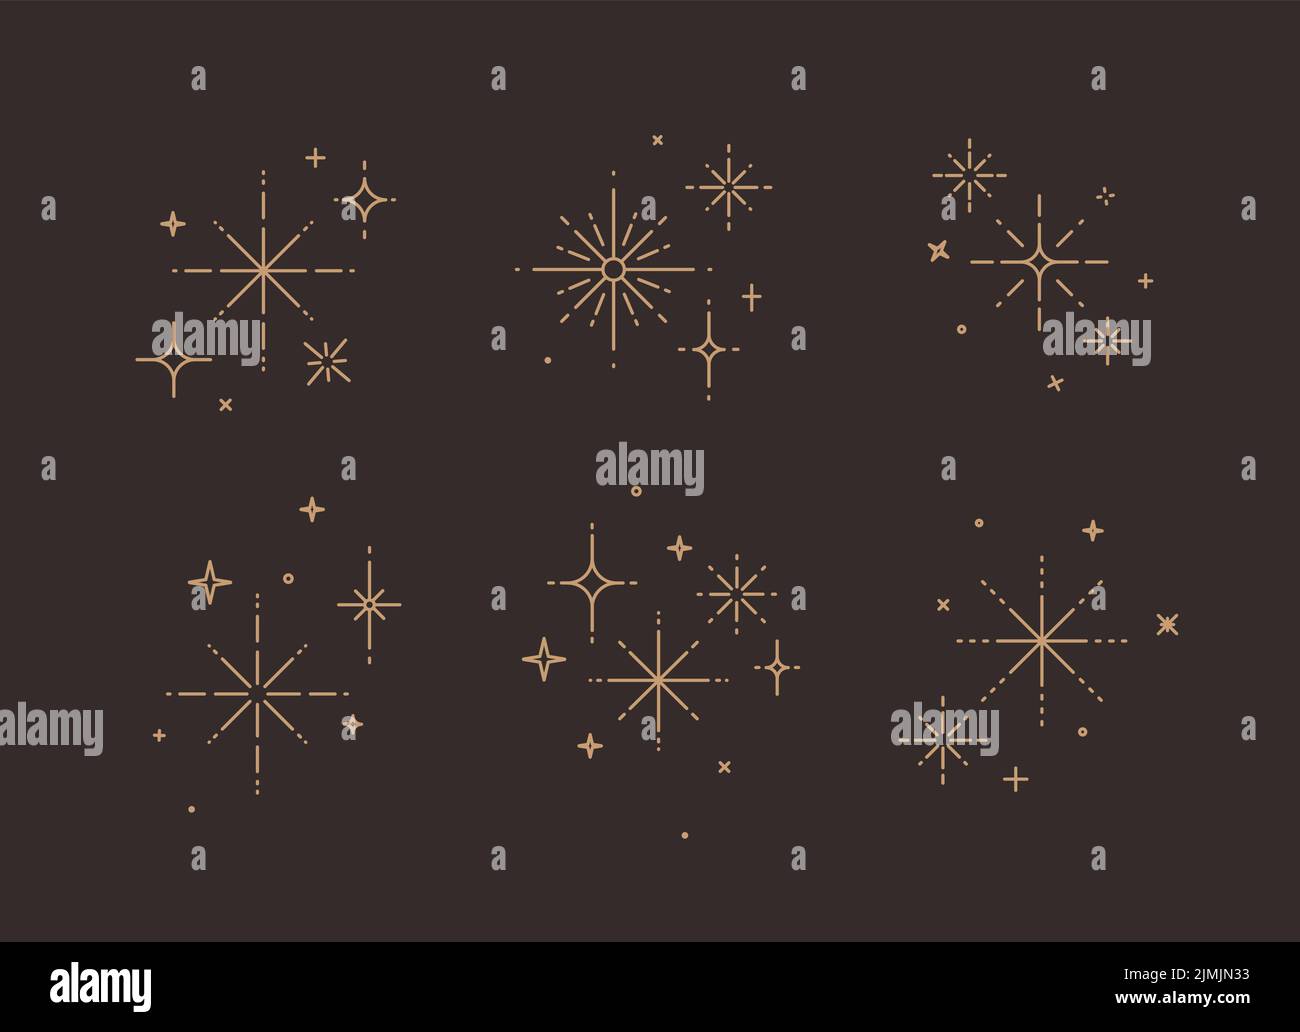 Clink splashes, stars, glowing in flat line art deco style drawing on brown background Stock Vector